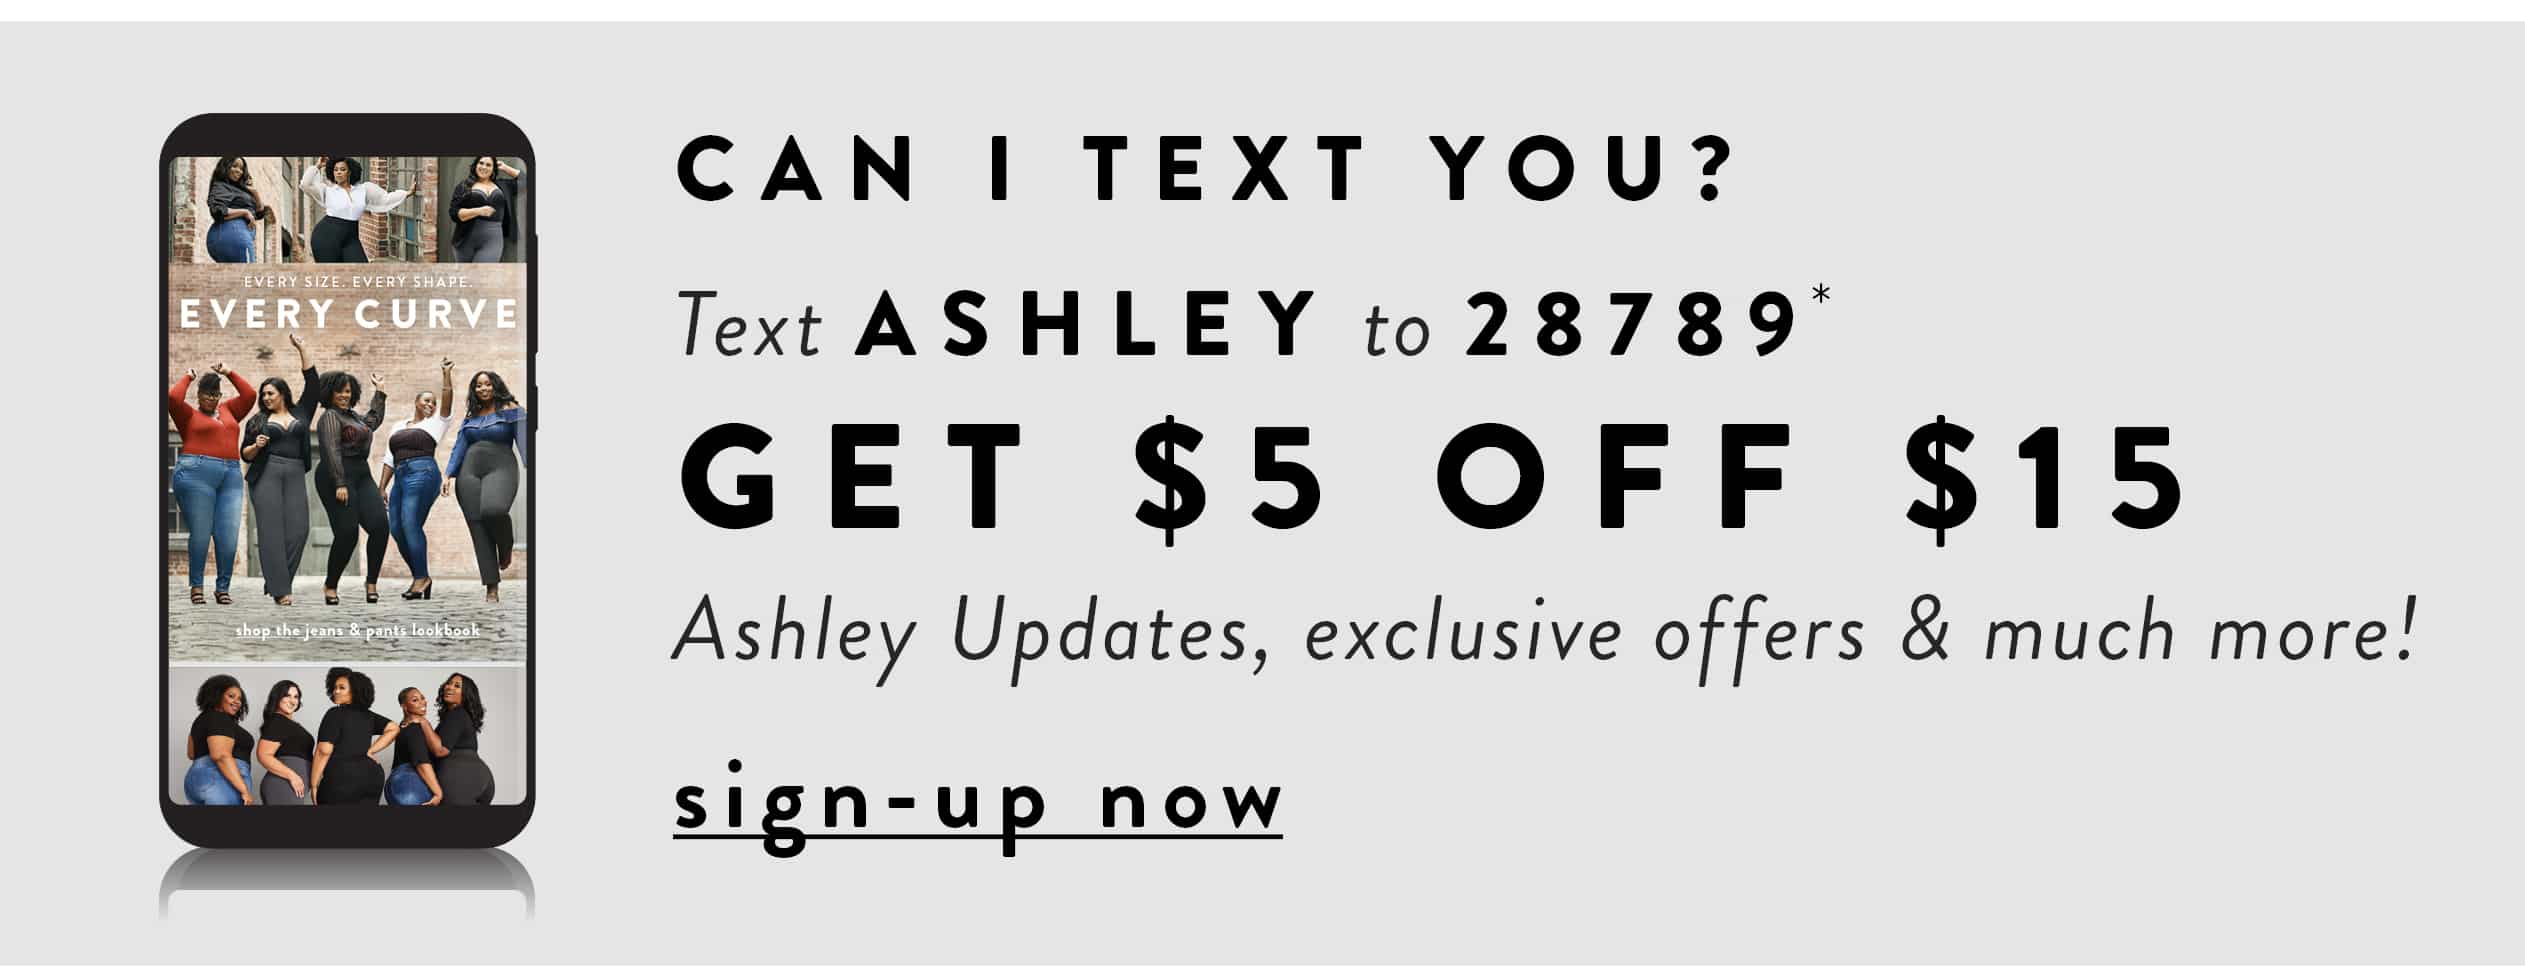 Can I text you? Text ASHLEY to 28789* Get $5 off $15, Ashley Updates, exclusive offers & much more! Sign-up now